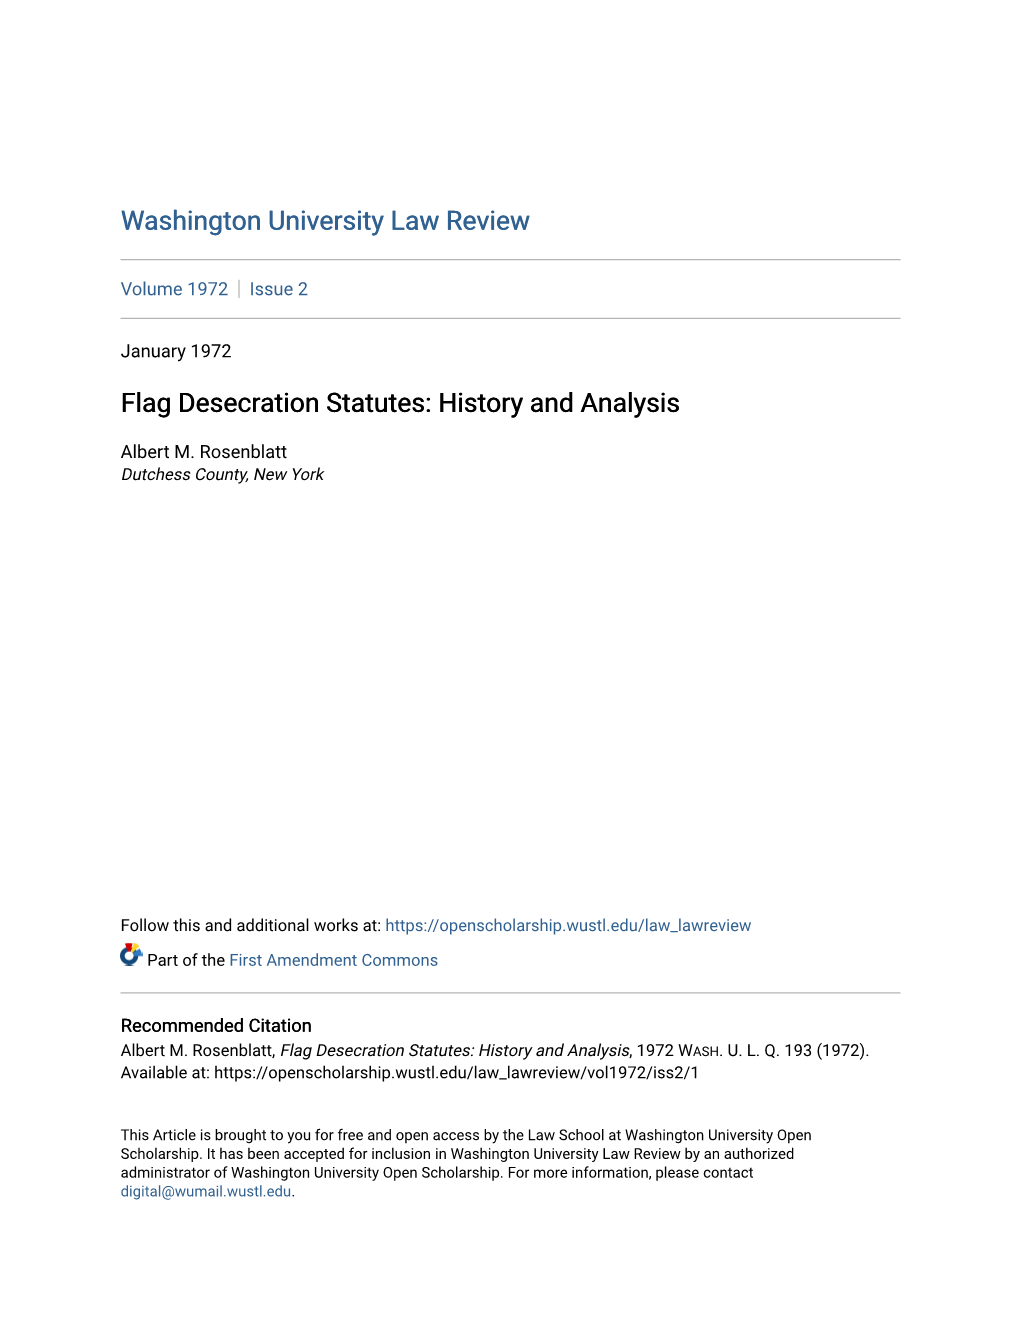 Flag Desecration Statutes: History and Analysis